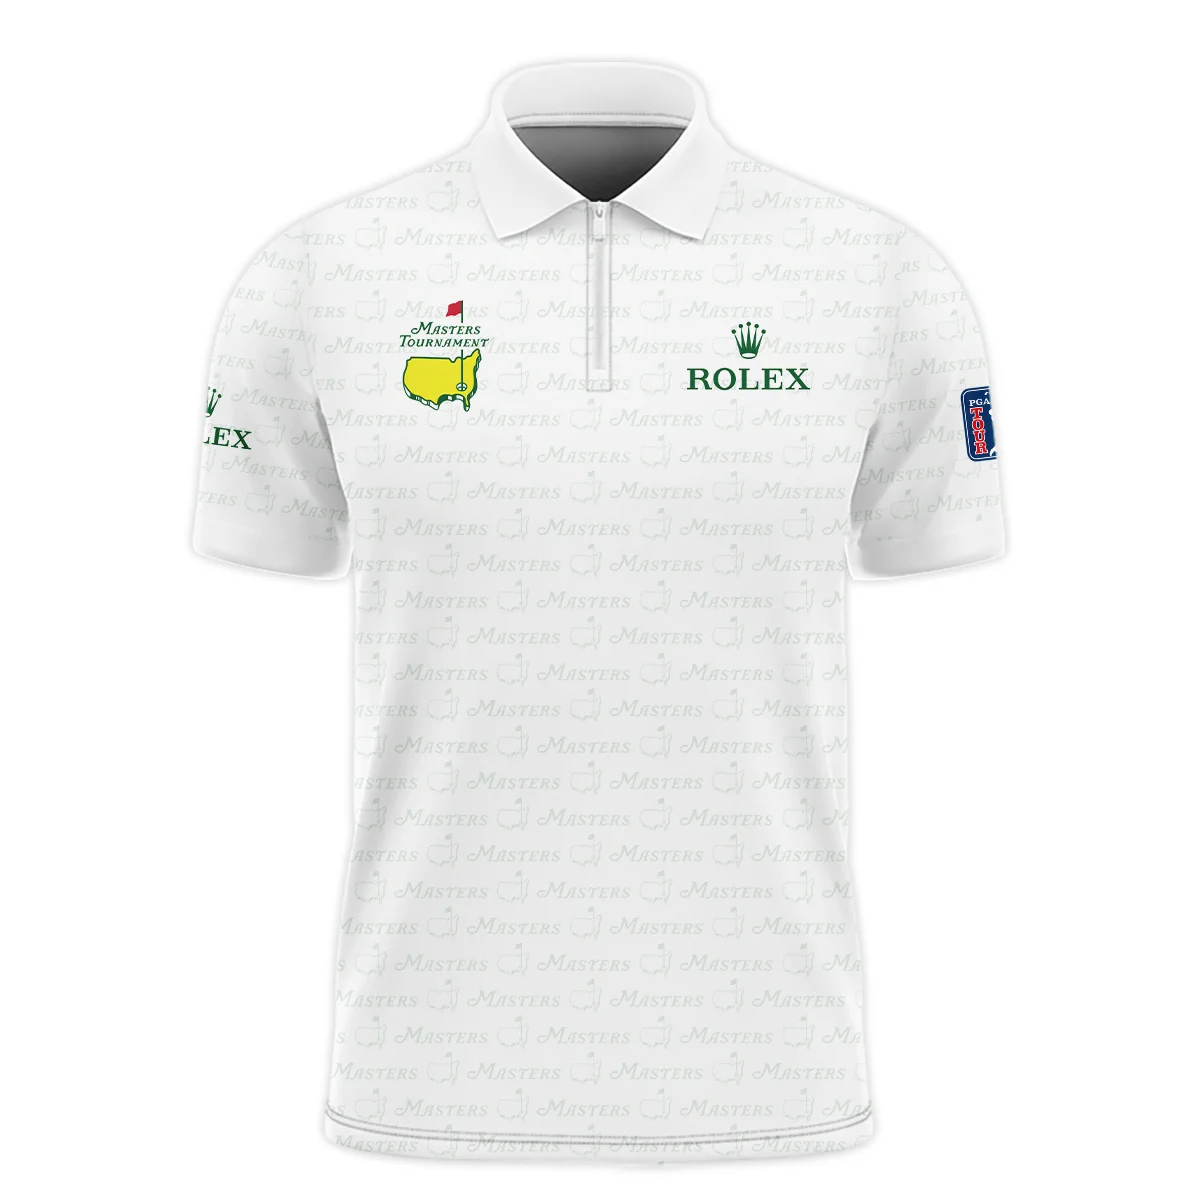 Golf Pattern Cup White Mix Green Masters Tournament Rolex Vneck Polo Shirt Style Classic Polo Shirt For Men